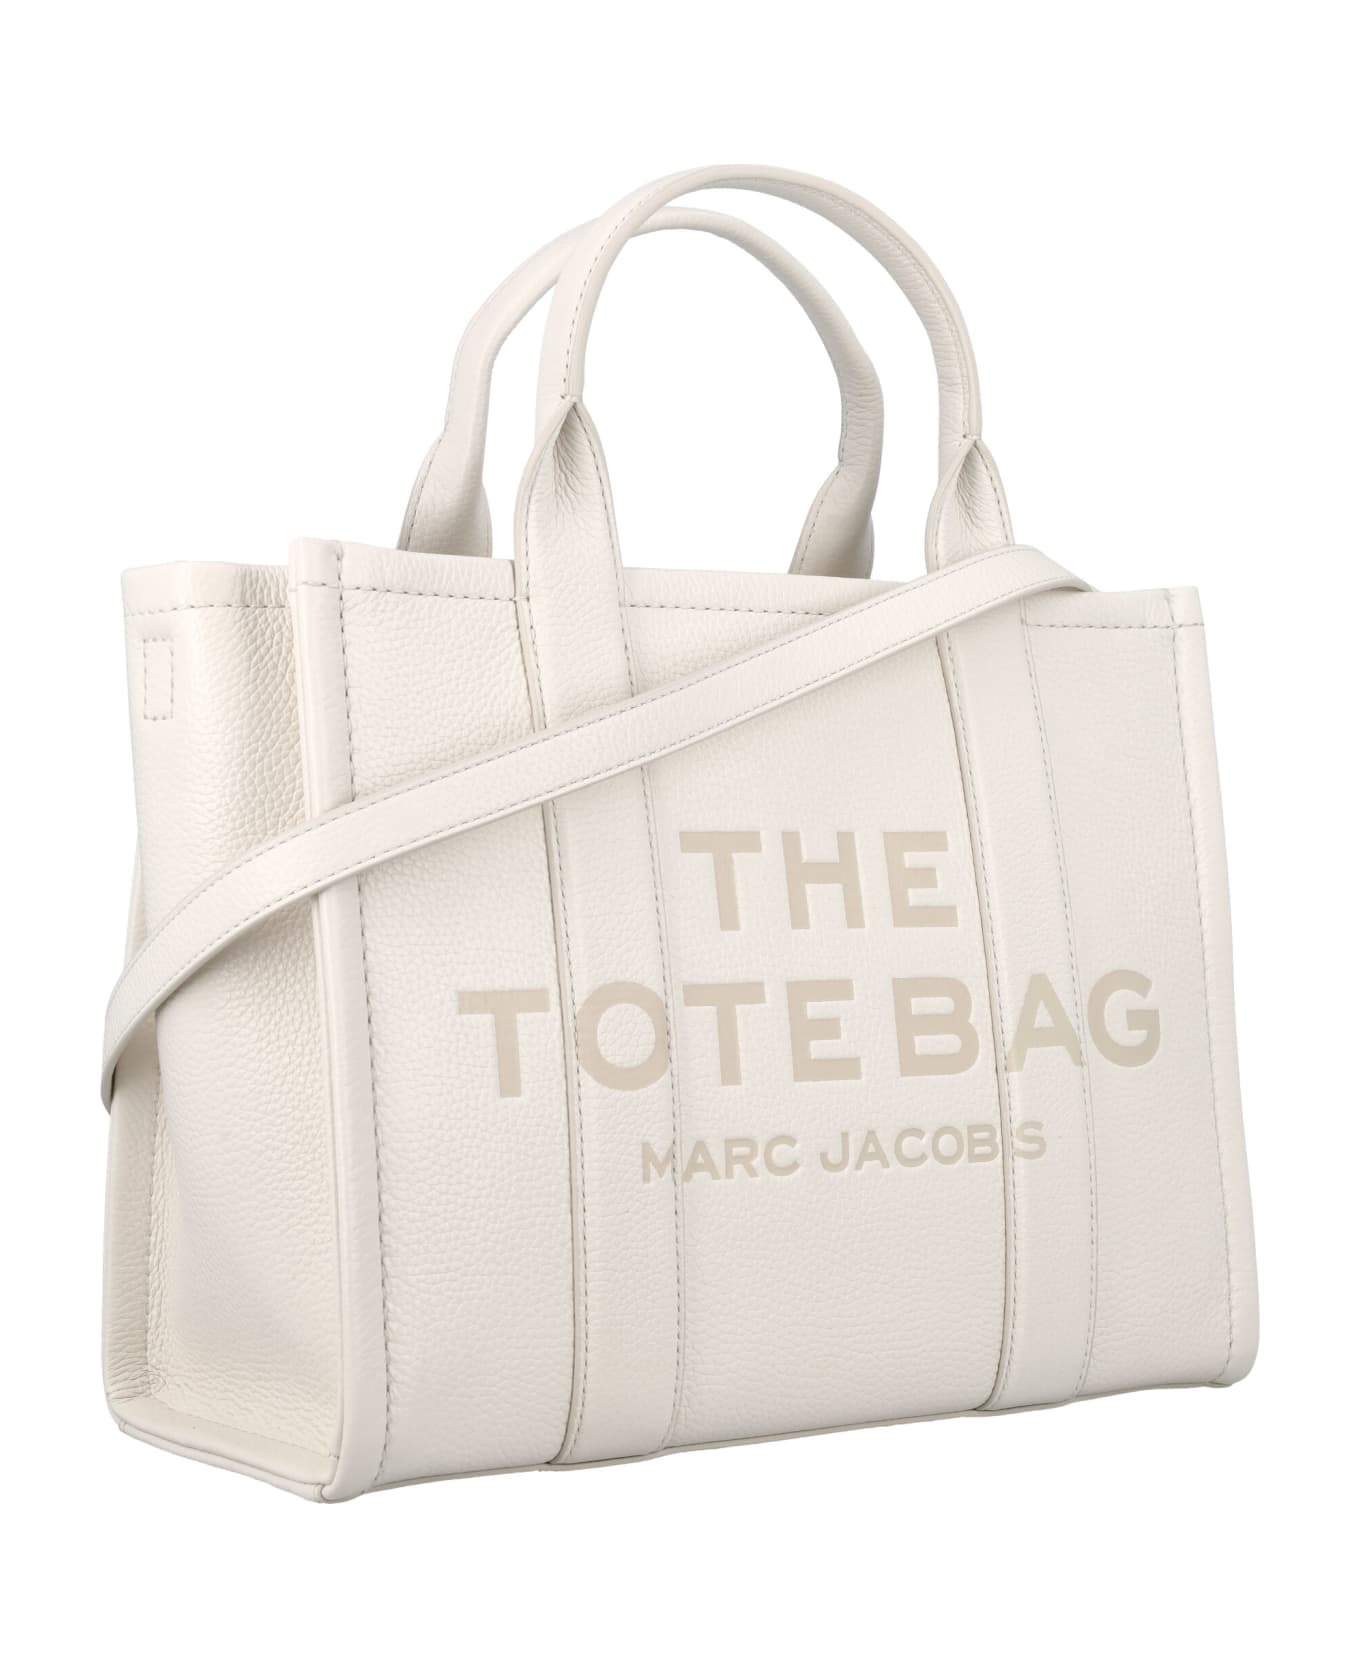 Marc Jacobs The Leather Medium Tote Bag - COTTON SILVER トートバッグ